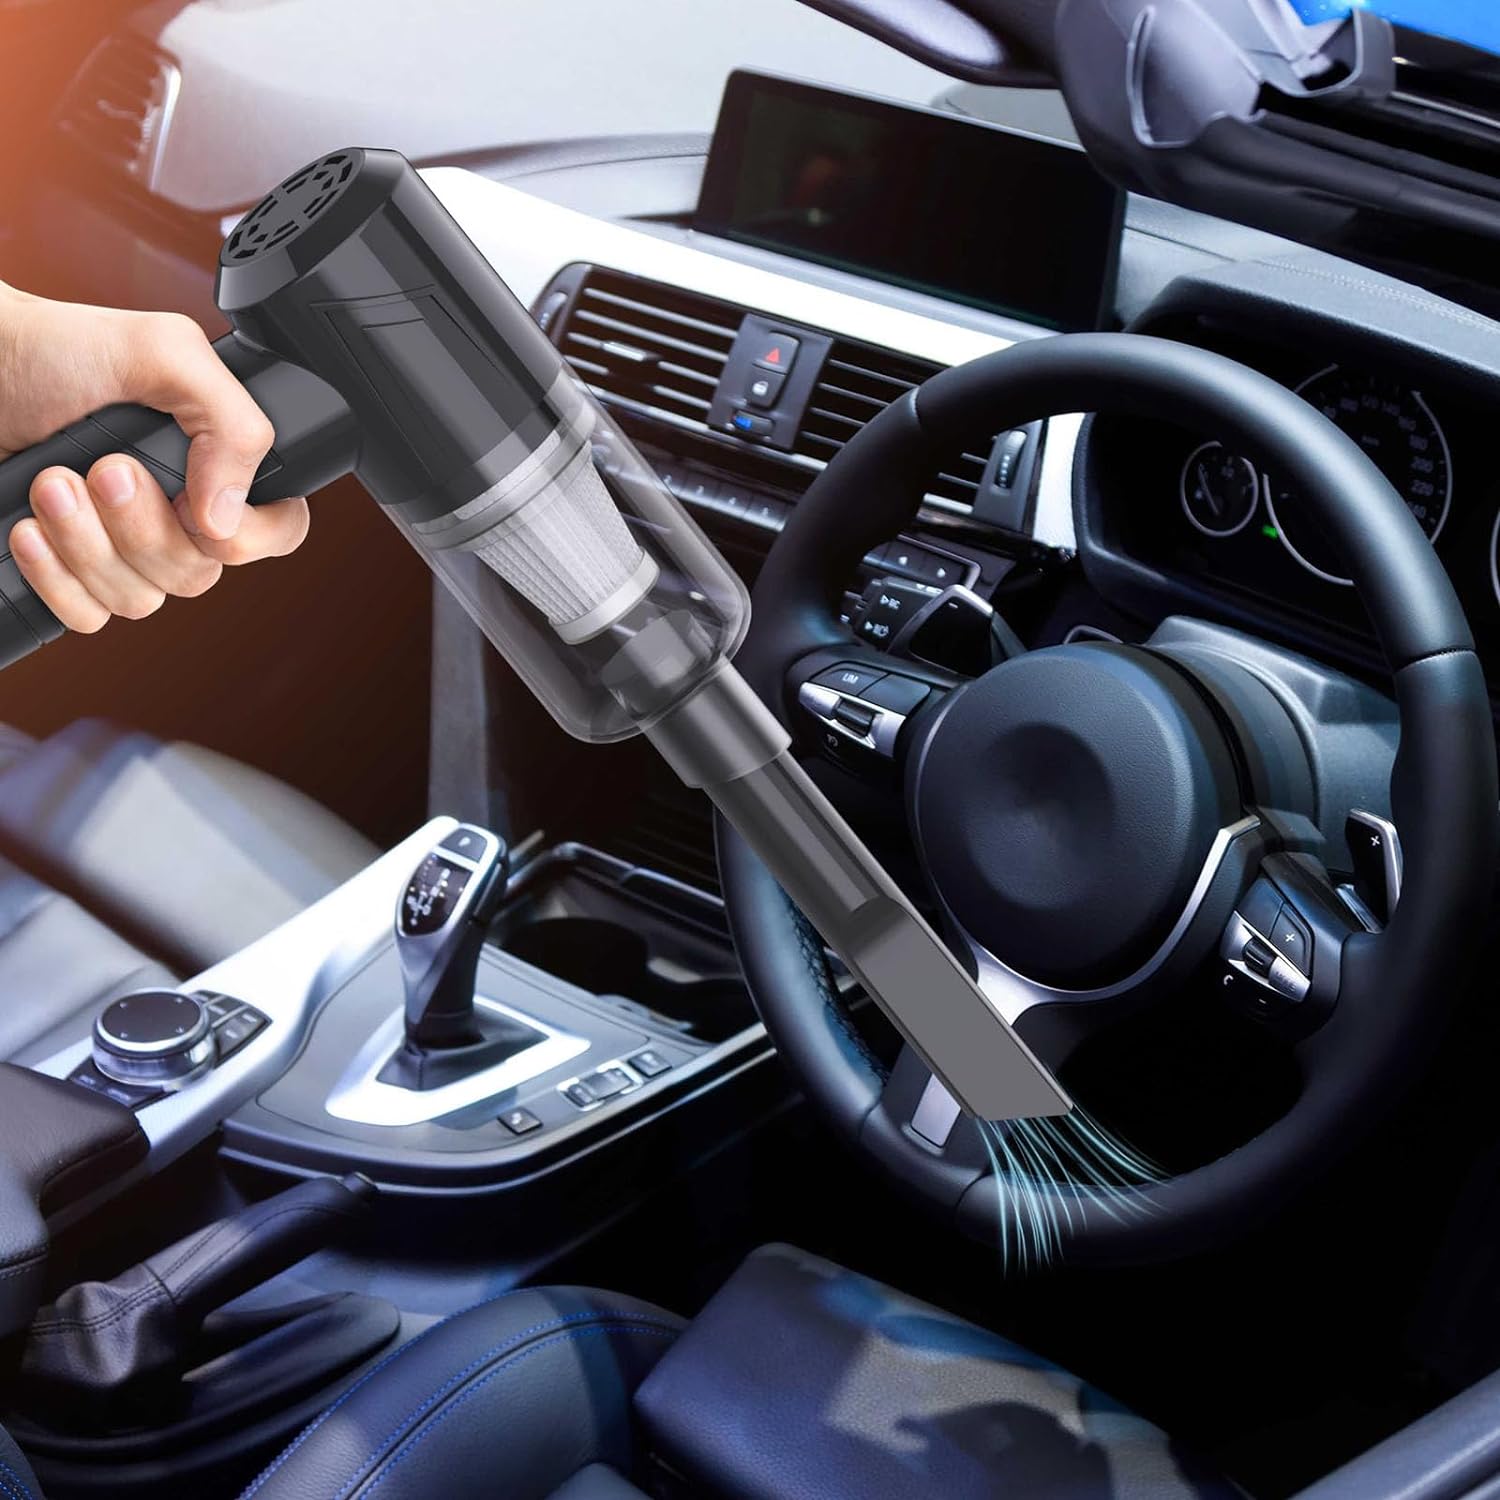 Ambitelligence Powerful Handheld Vacuum Cleaner for Car & Home Cleaning, 2-in-1 Mini Vacuum & Blower